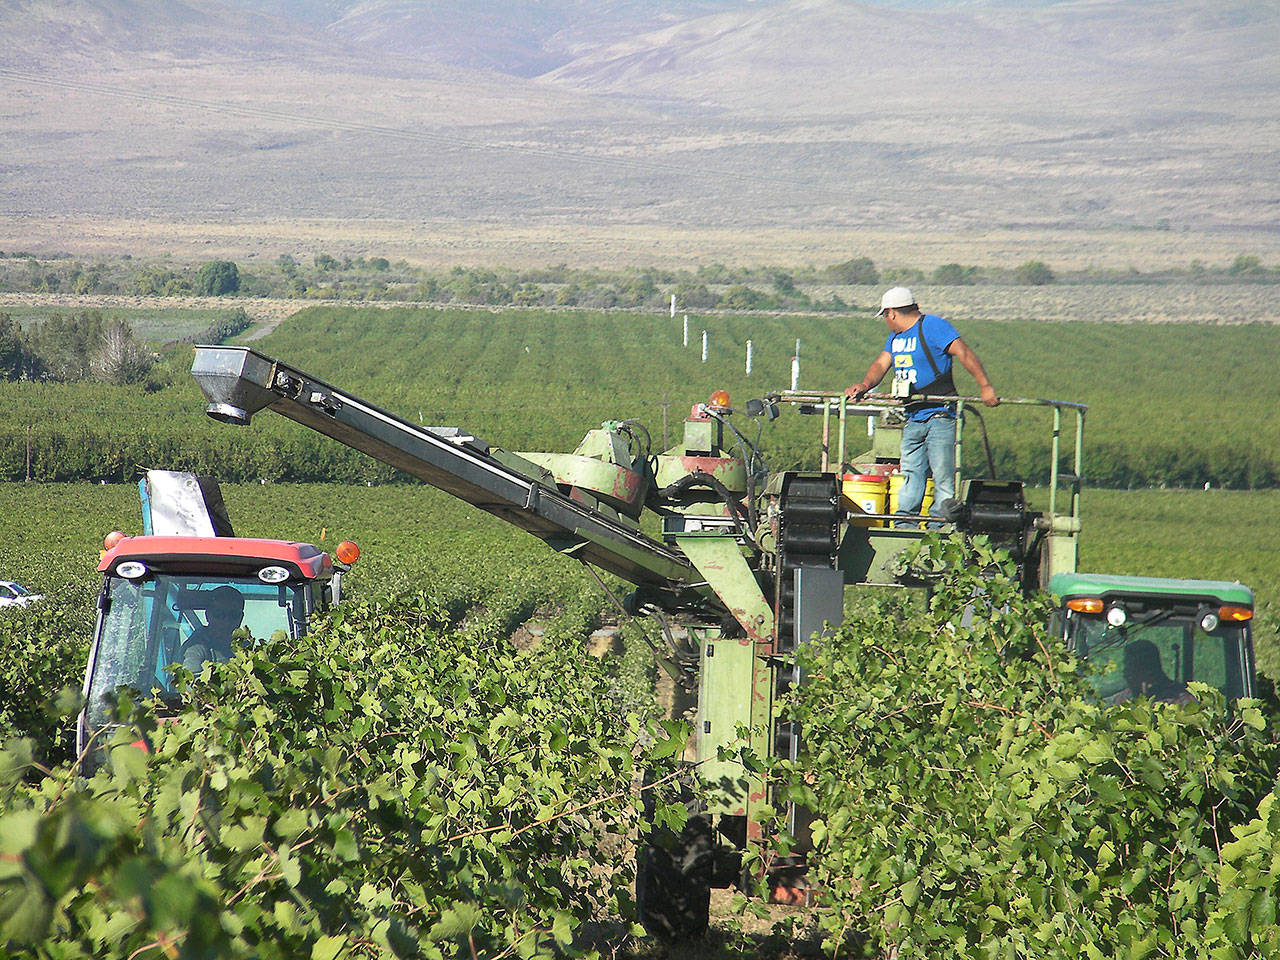 A crew mechanically harvests grapes on the western edge of the Wahluke Slope, one of the most important regions for the Washington wine industry. (Photo by Andy Perdue/Great Northwest Wine)